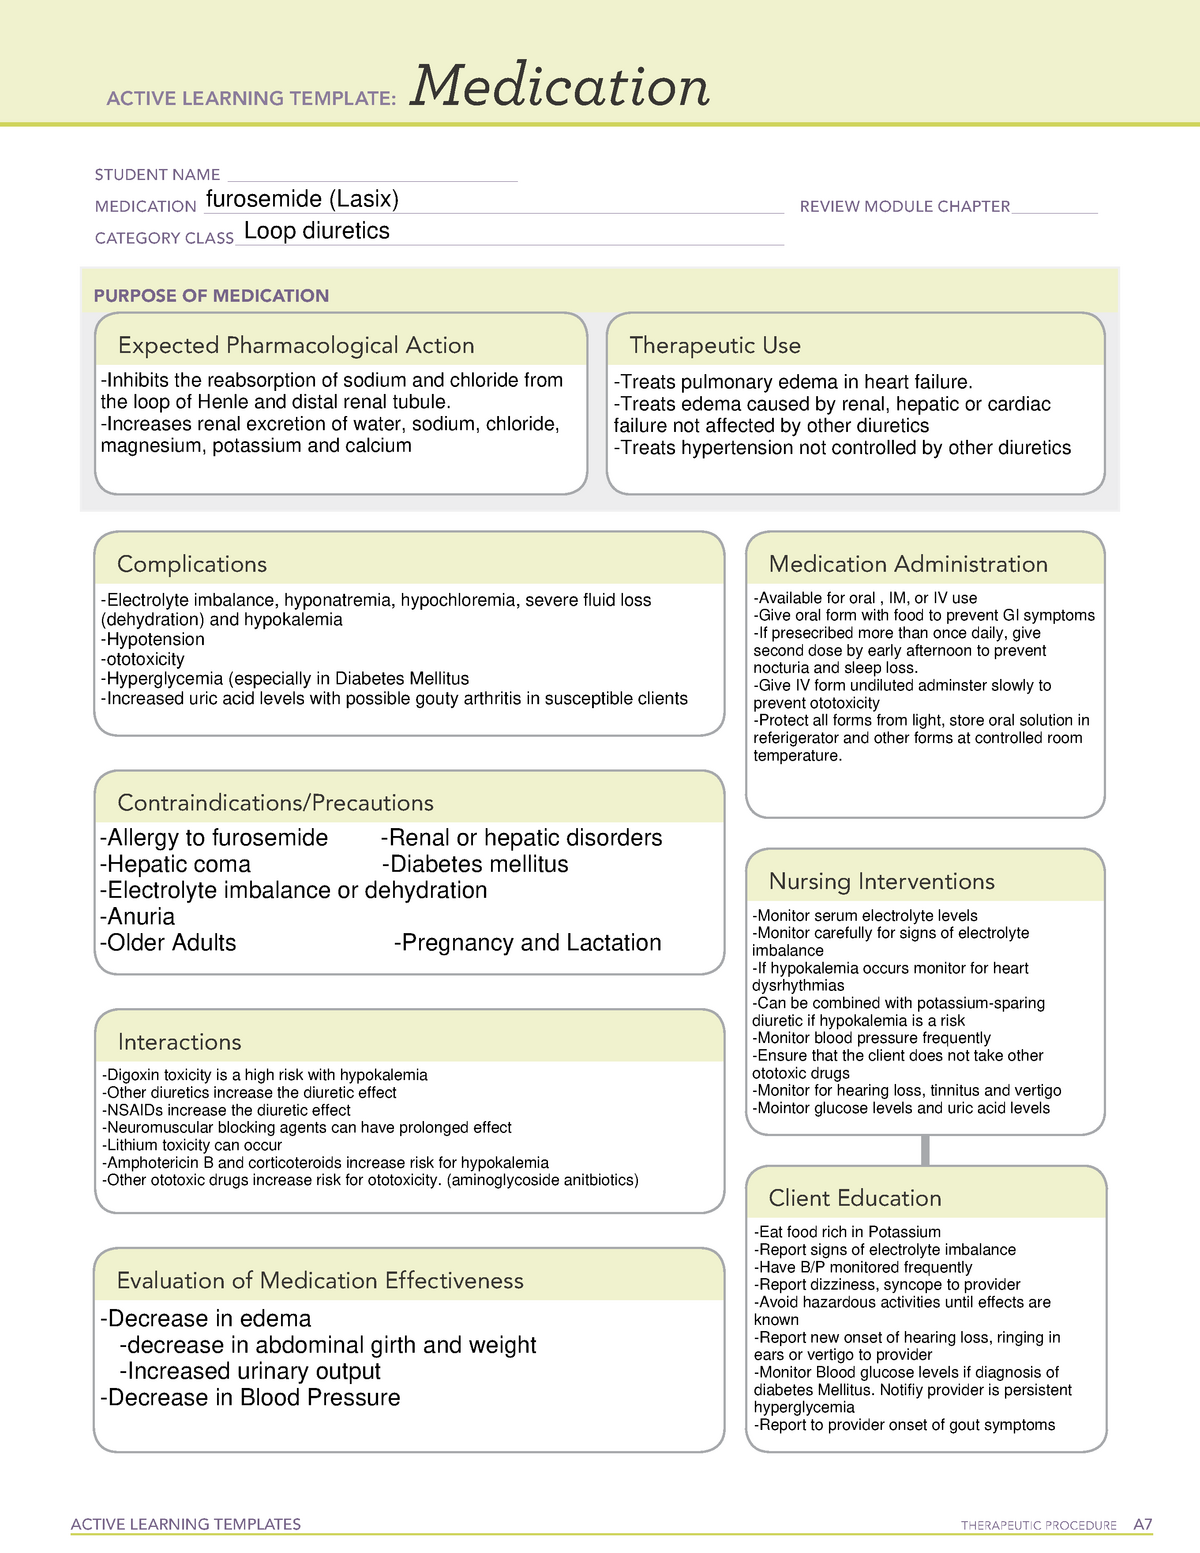 loop-diuretic-medication-template-active-learning-templates-therapeutic-procedure-a-medication